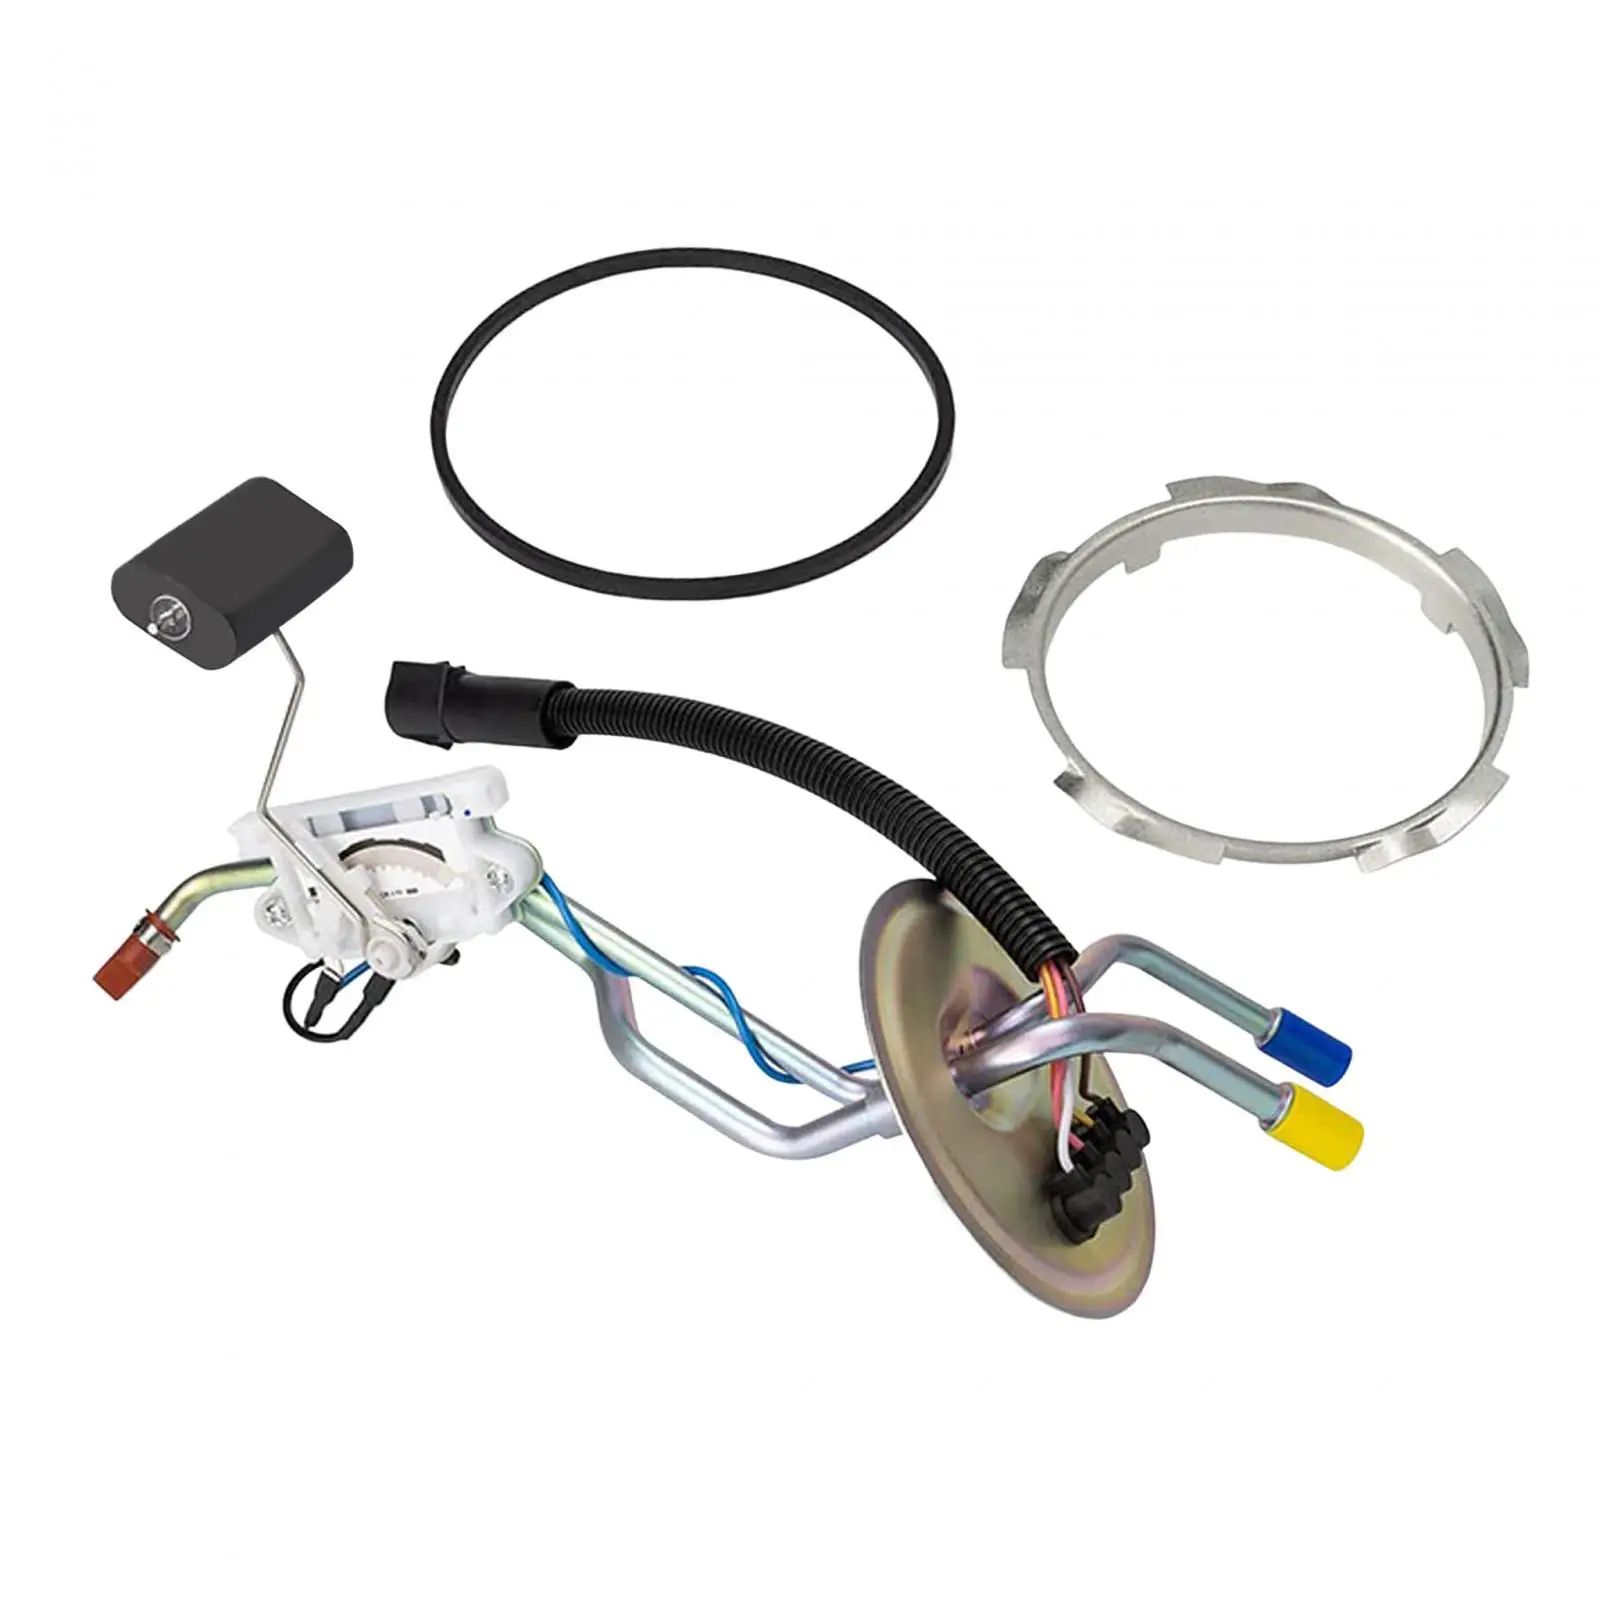 Diesel Fuel Pump Tank Sending Unit Fmsu-9der Repair Parts for Ford F250 F350 Accessories High Performance Easily to Install